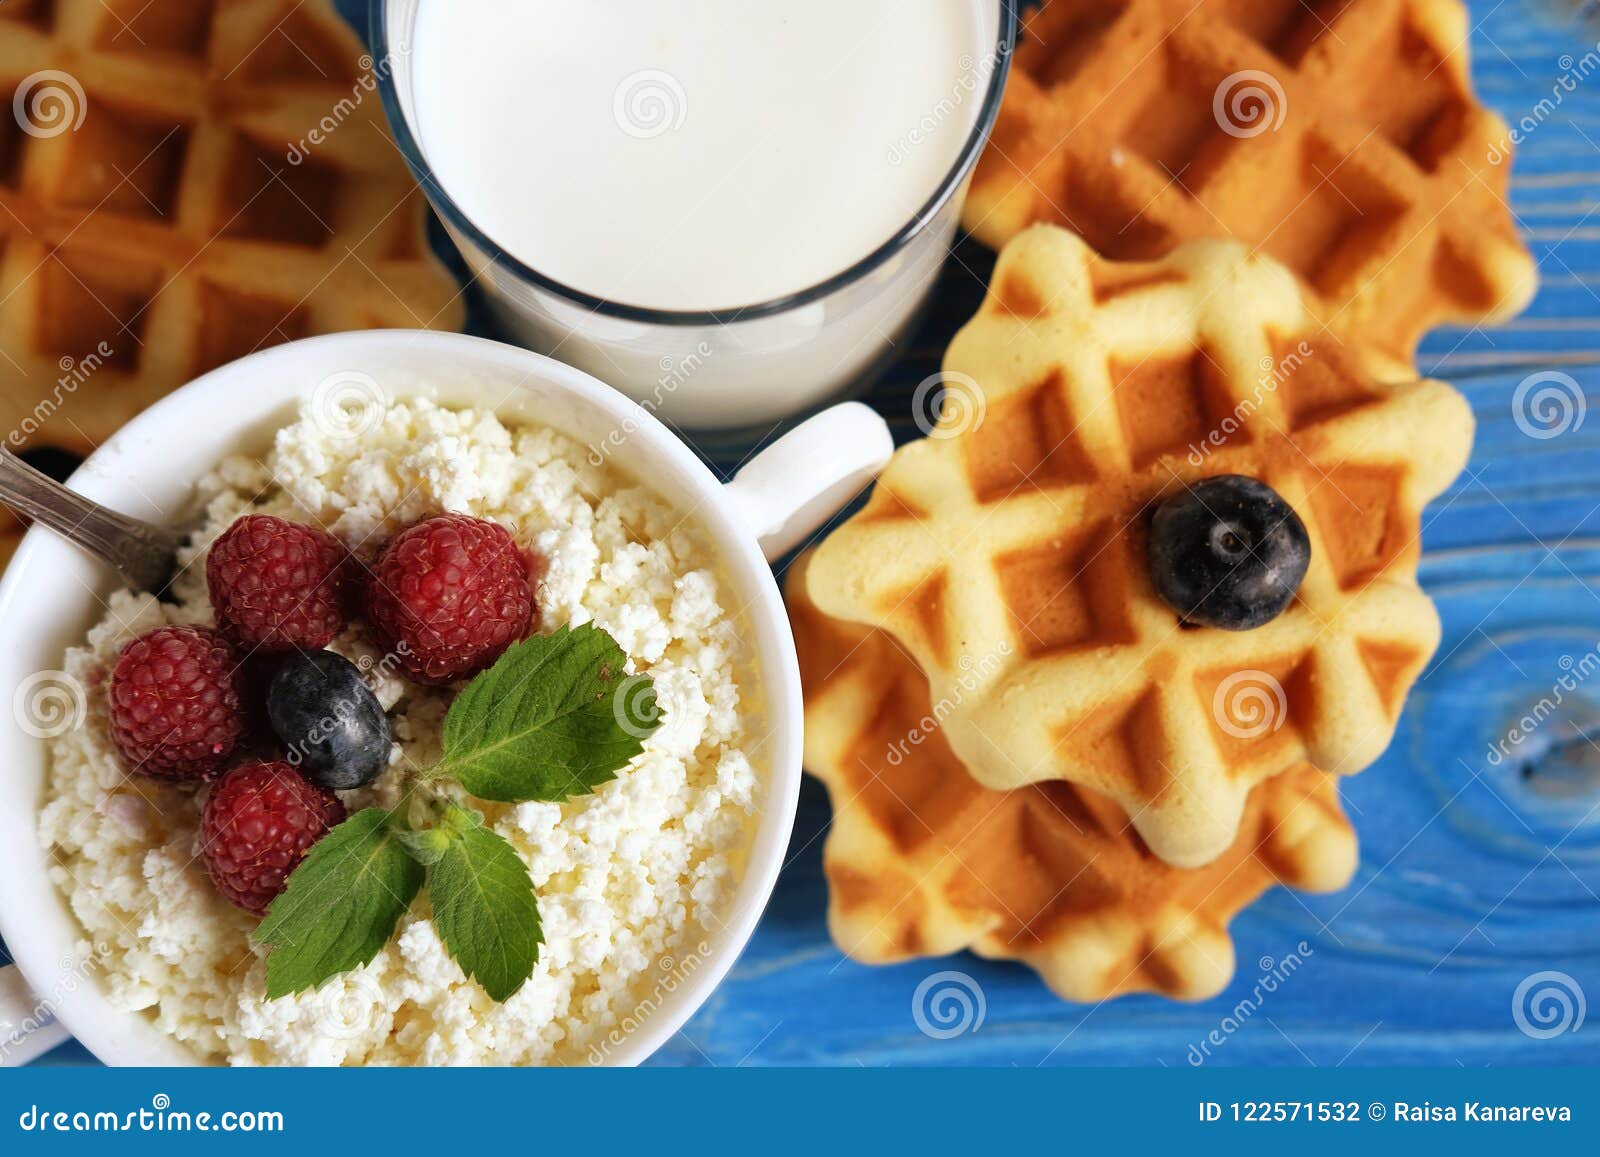 Cottage Cheese With Berries Waffles And Milk On A Wooden Blue